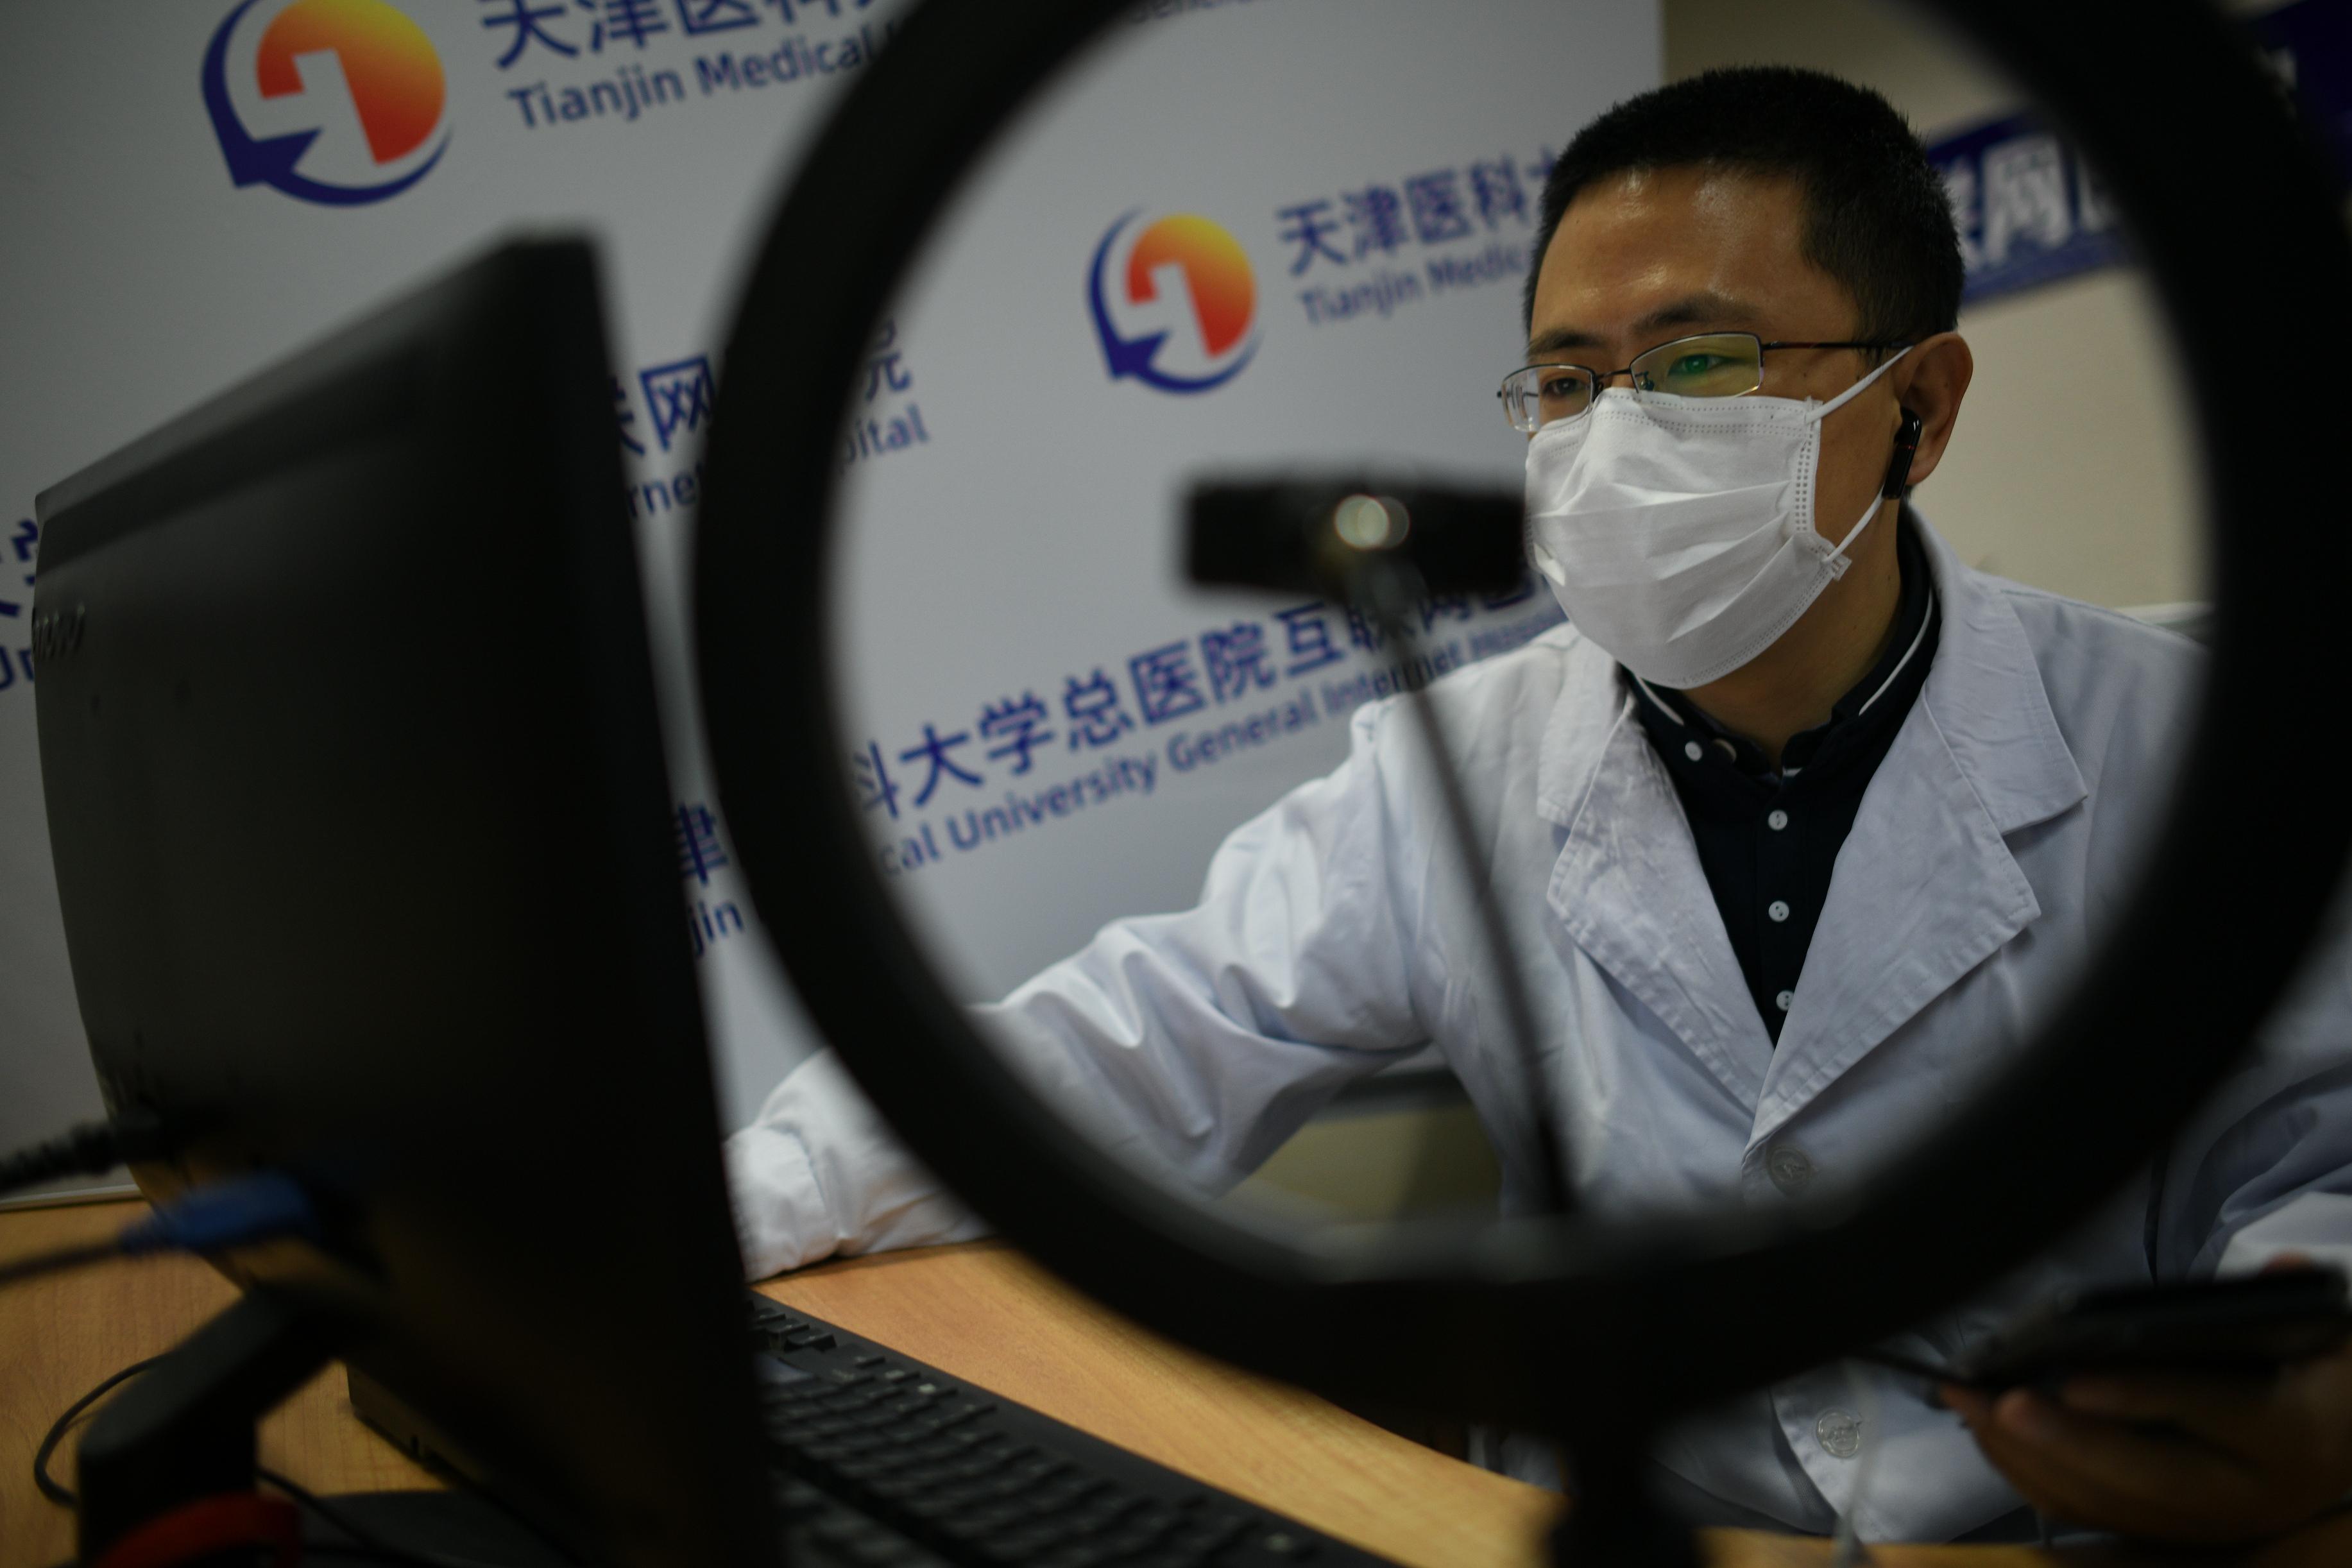 A respiratory and critical care medicine department doctor communicates with patients via Tianjin Medical University General Internet Hospital's platform on March 4, 2020 in Tianjin, China. (Tong Yu/China News Service via Getty Images)